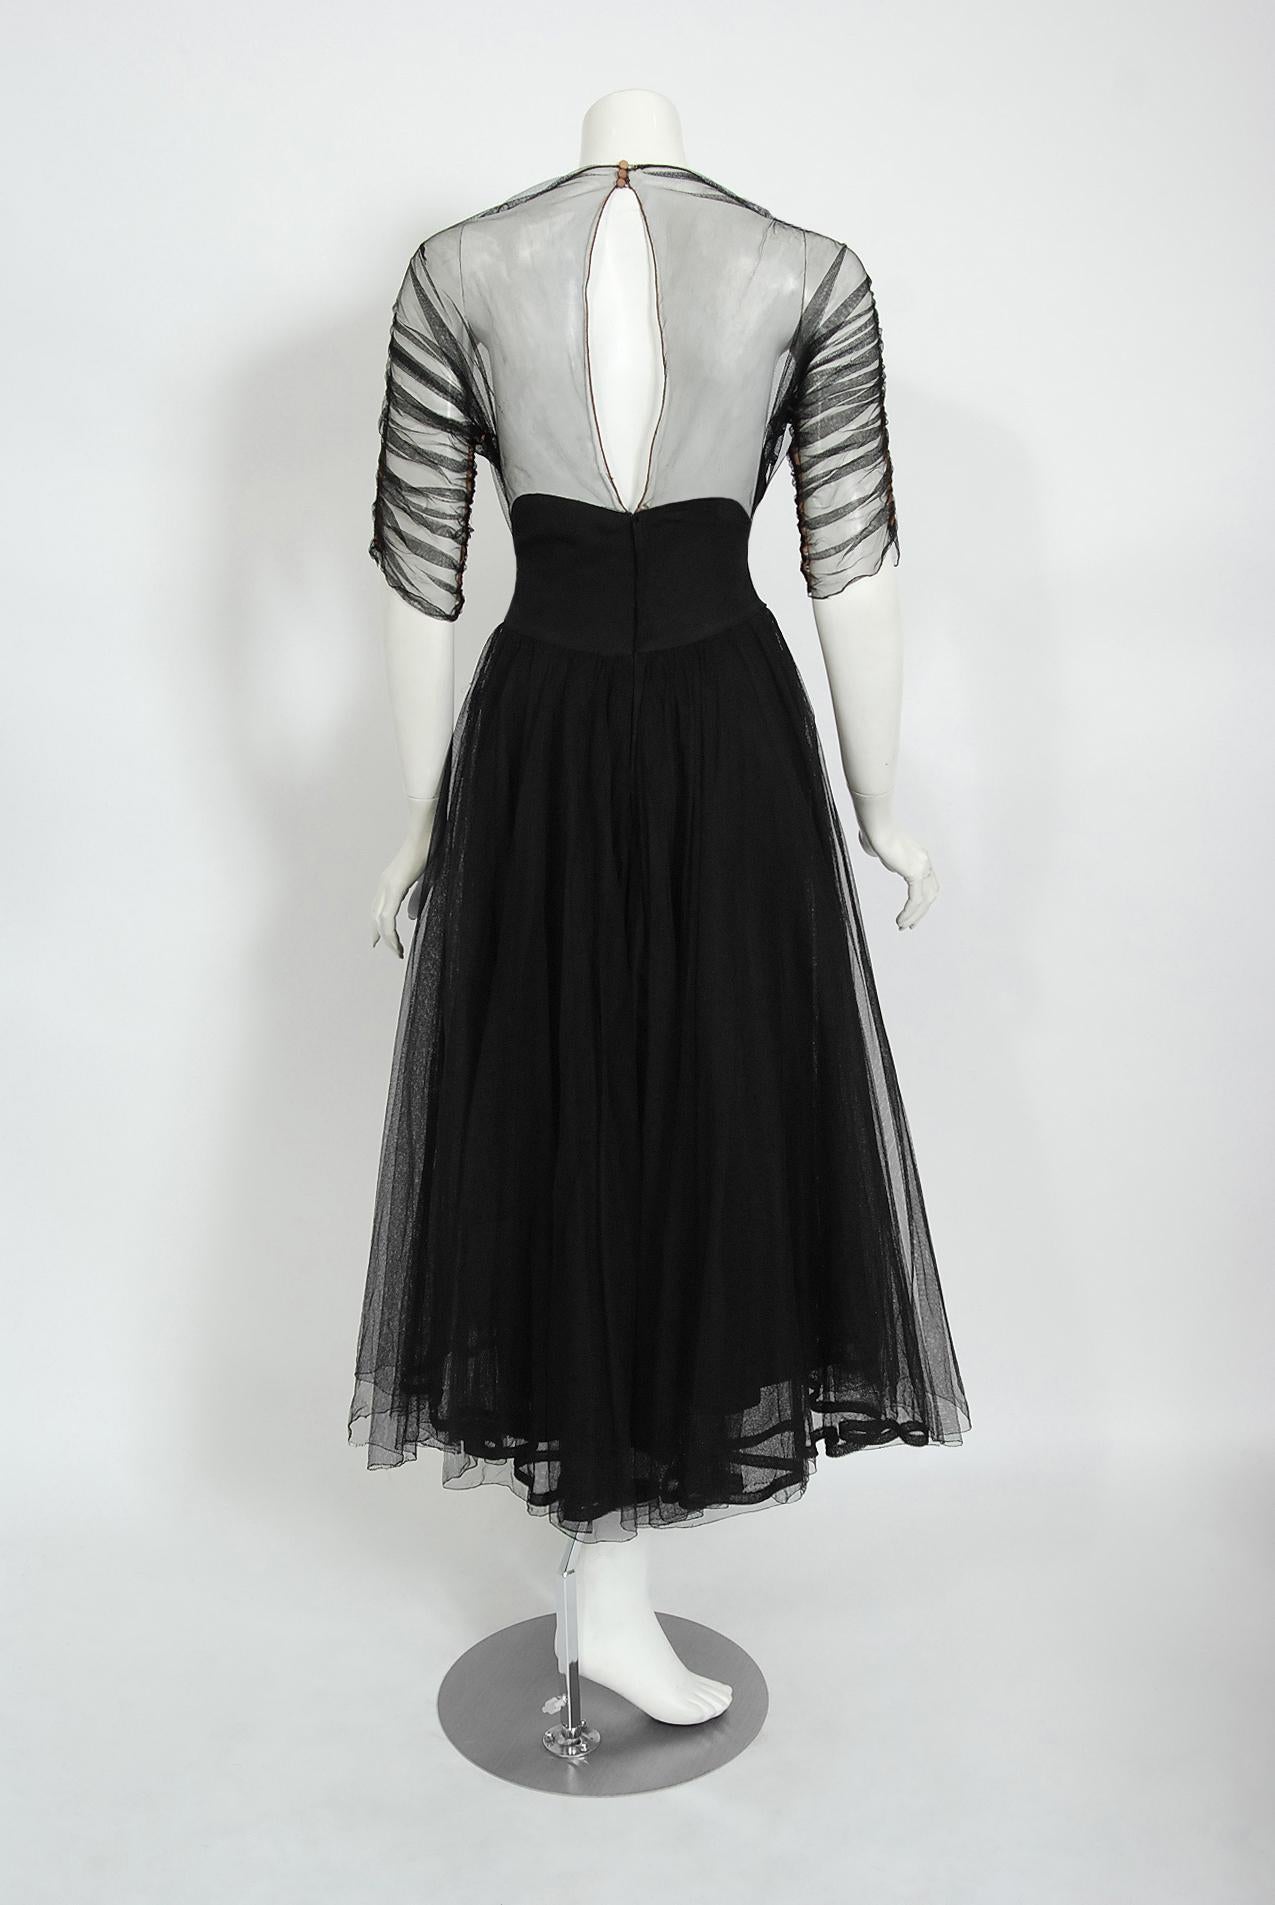 Vintage 1945 Irene Lentz Couture Documented Sheer Net-Tulle Lace Illusion Dress 1